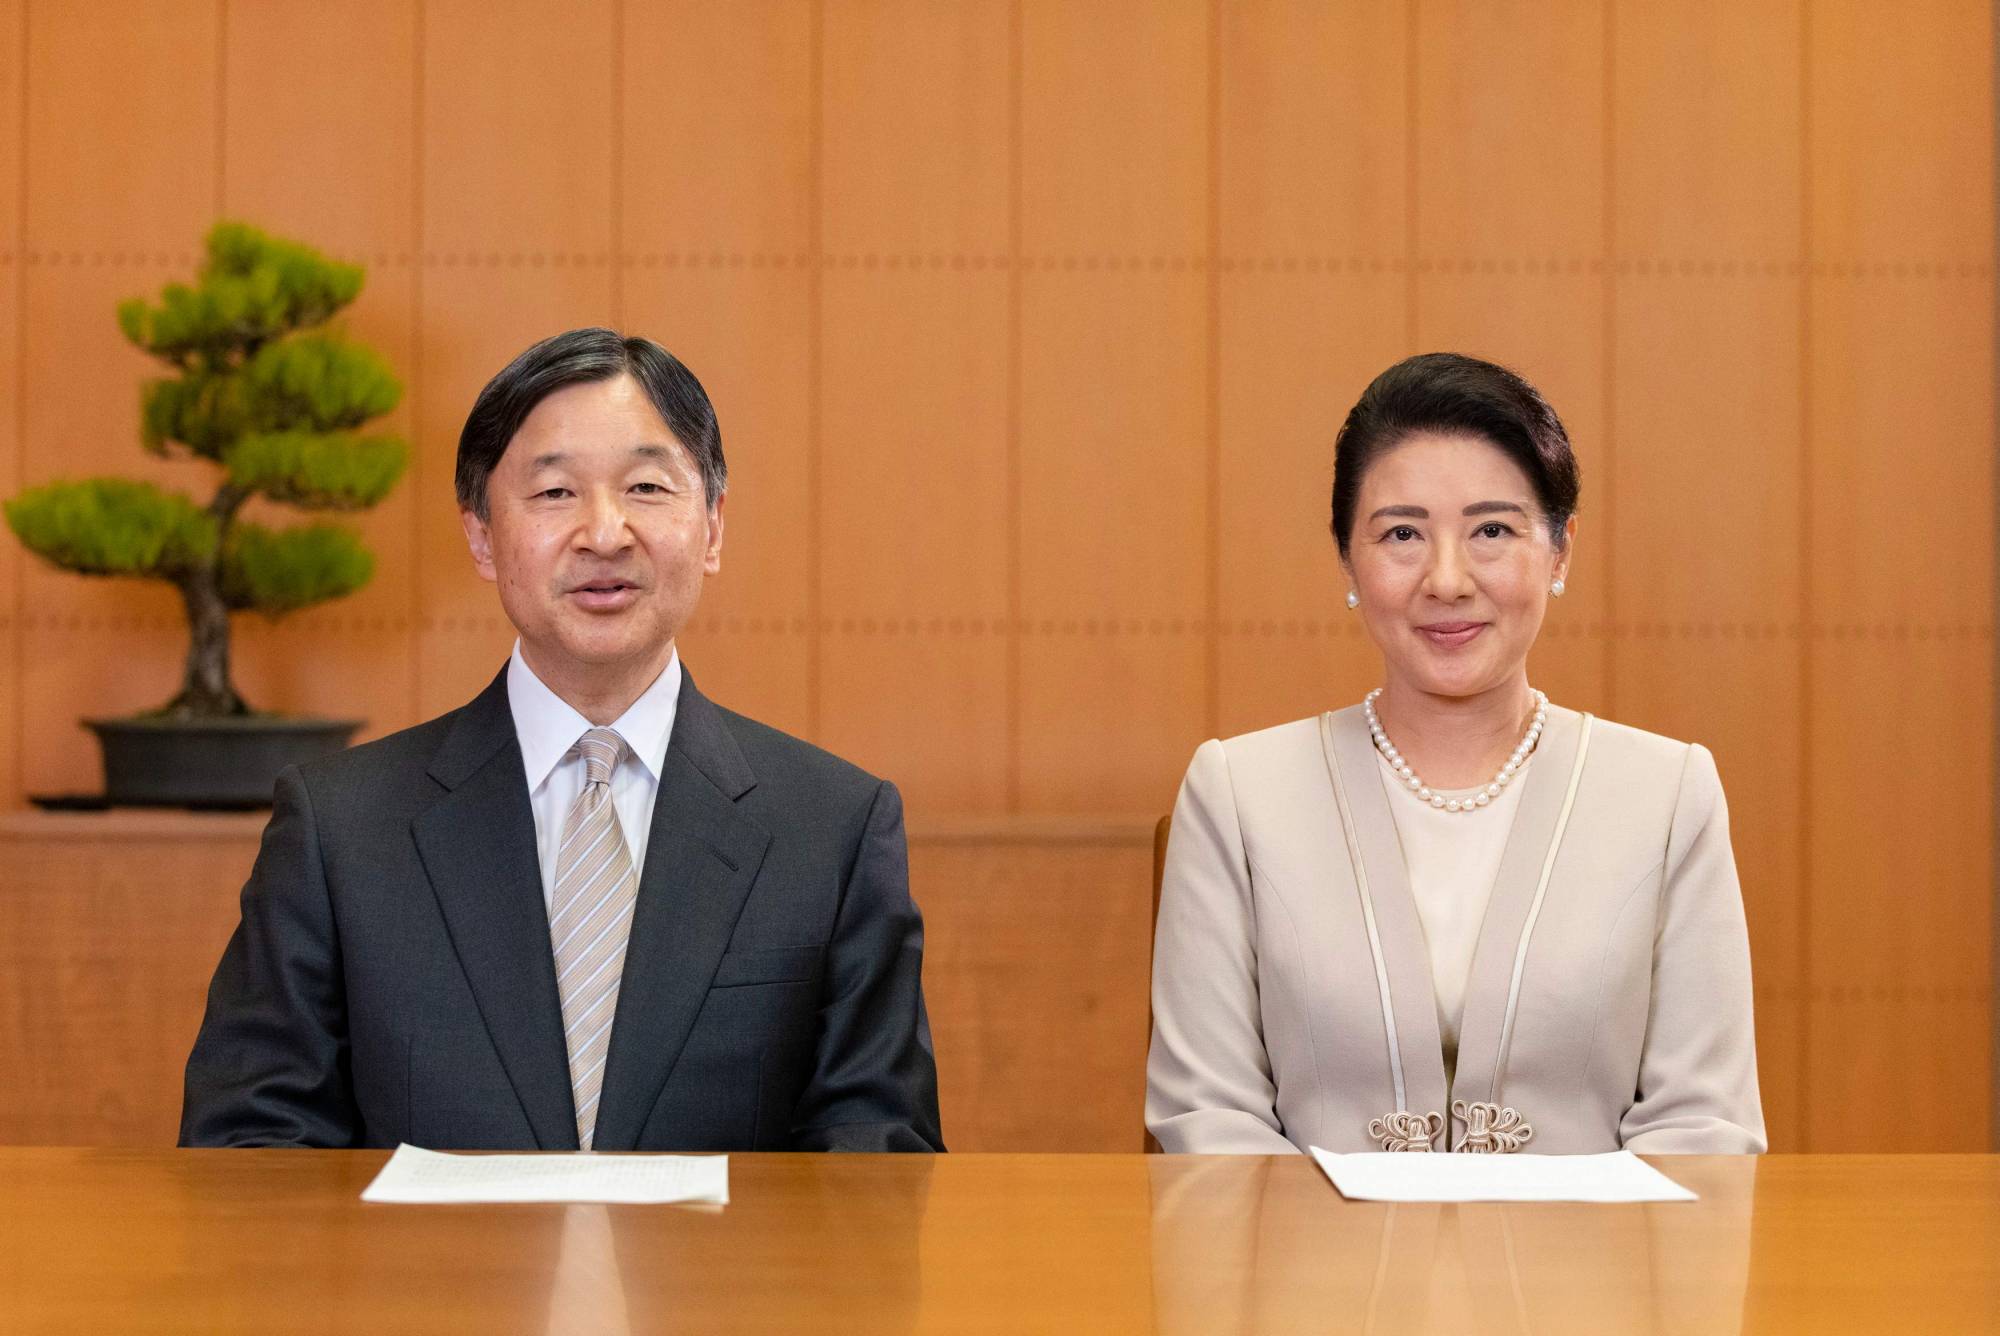 Emperor Naruhito and Empress Masako speak during a New Year's video message at the Akasaka Estate residence in Tokyo on Thursday.   | IMPERIAL HOUSEHOLD AGENCY OF JAPAN / VIA AFP-JIJI